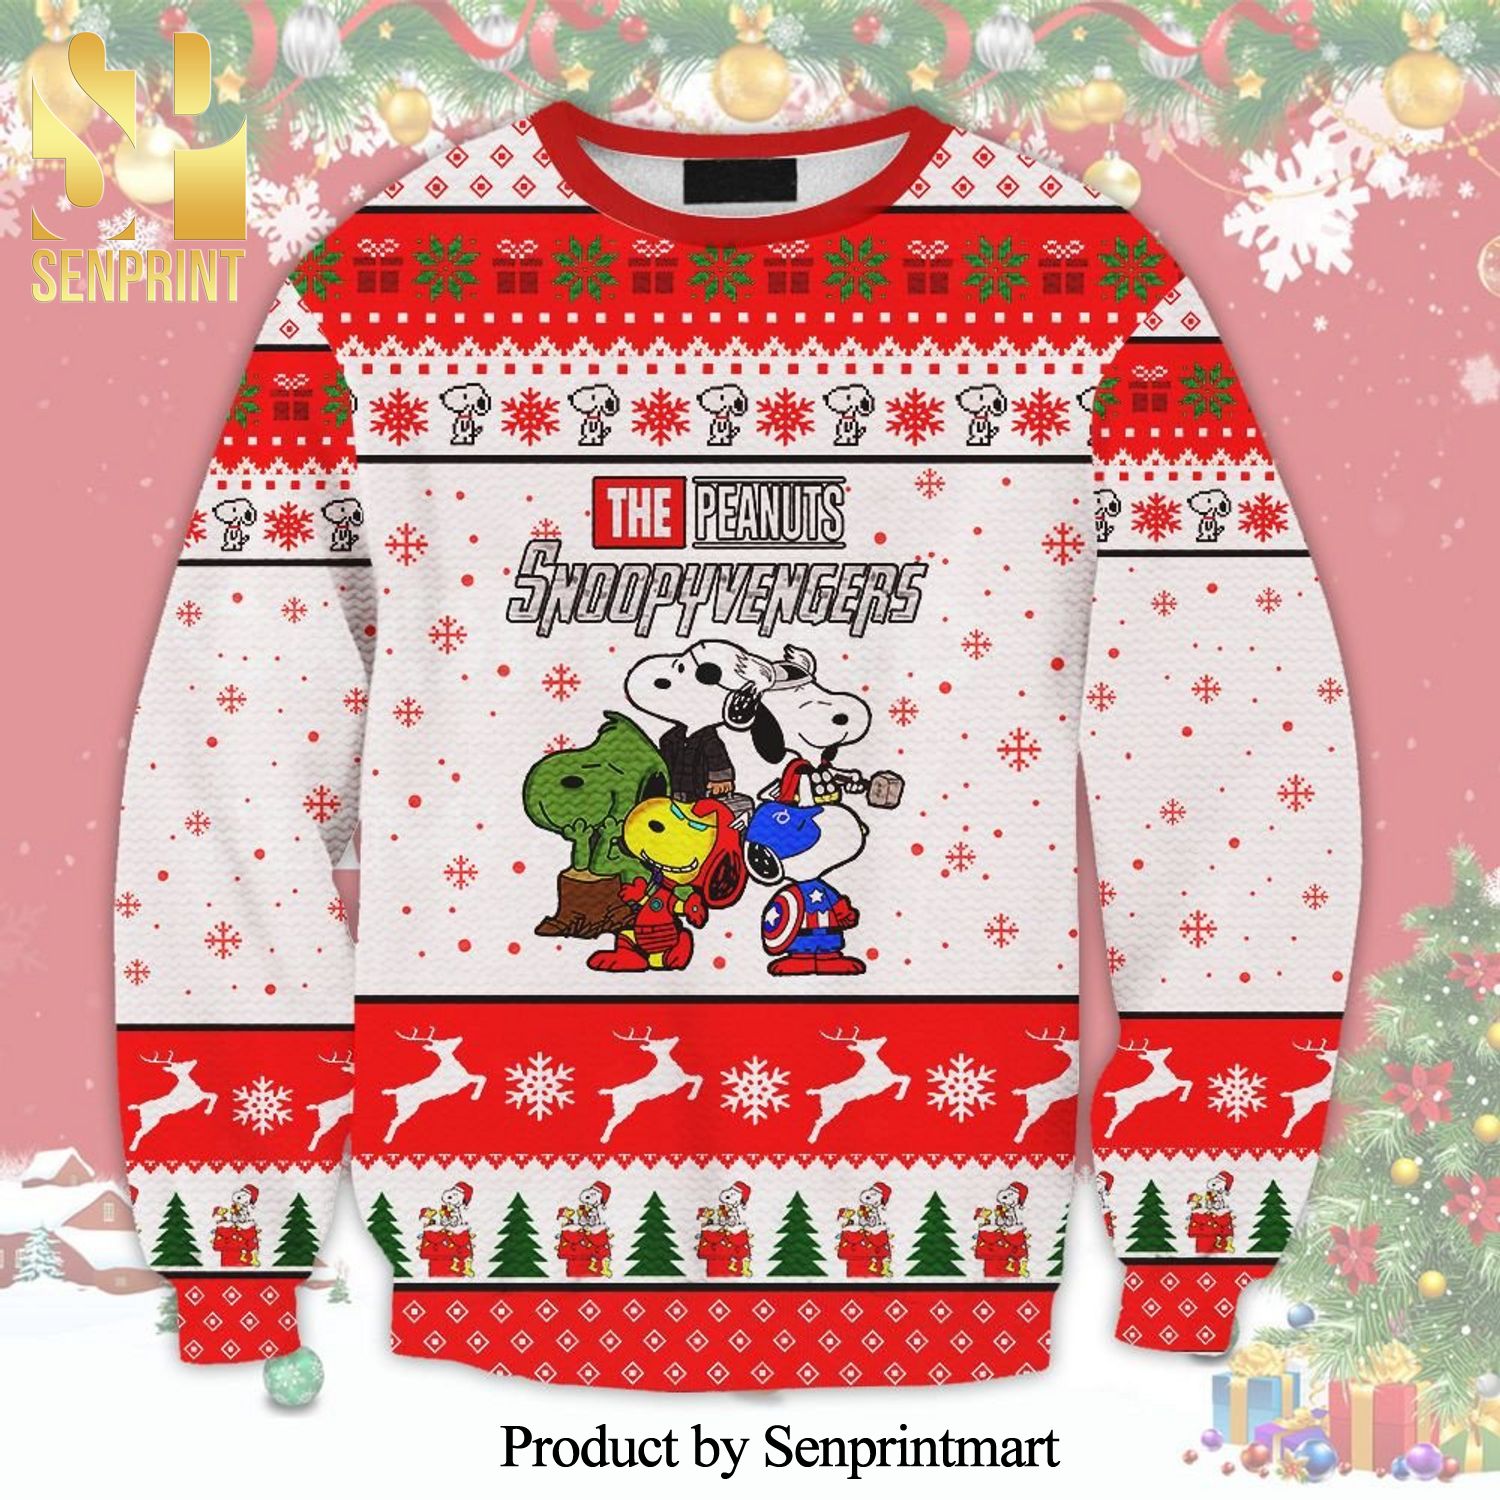 The Peanuts Snoopyvengers Snoopy Avengers Marvel Snowflake Knitted Ugly Christmas Sweater